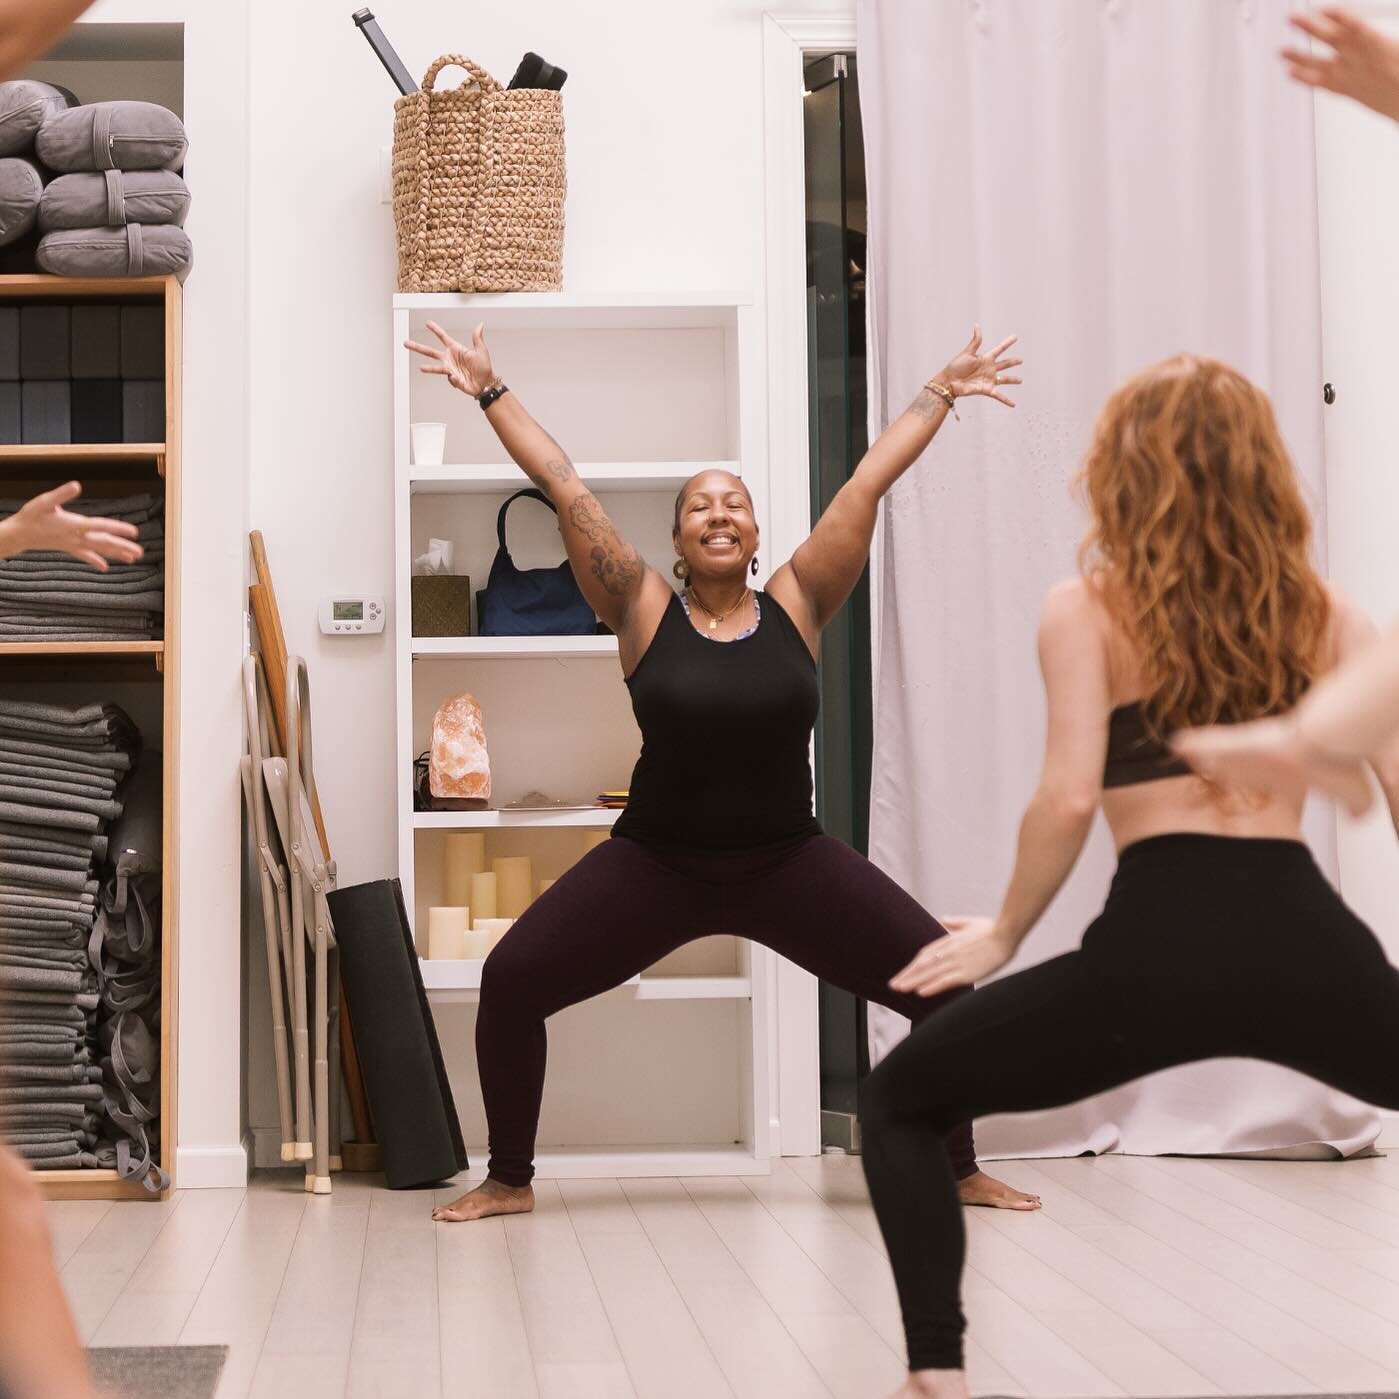 Do you know DeShauna? Her warm energy and bright smile are a great start to your morning. Her Thursday 9:30AM class is now a morning option to take the popular Flow &amp; Restore.

The first half of class warms up with a dynamic Vinyasa flow, moving 